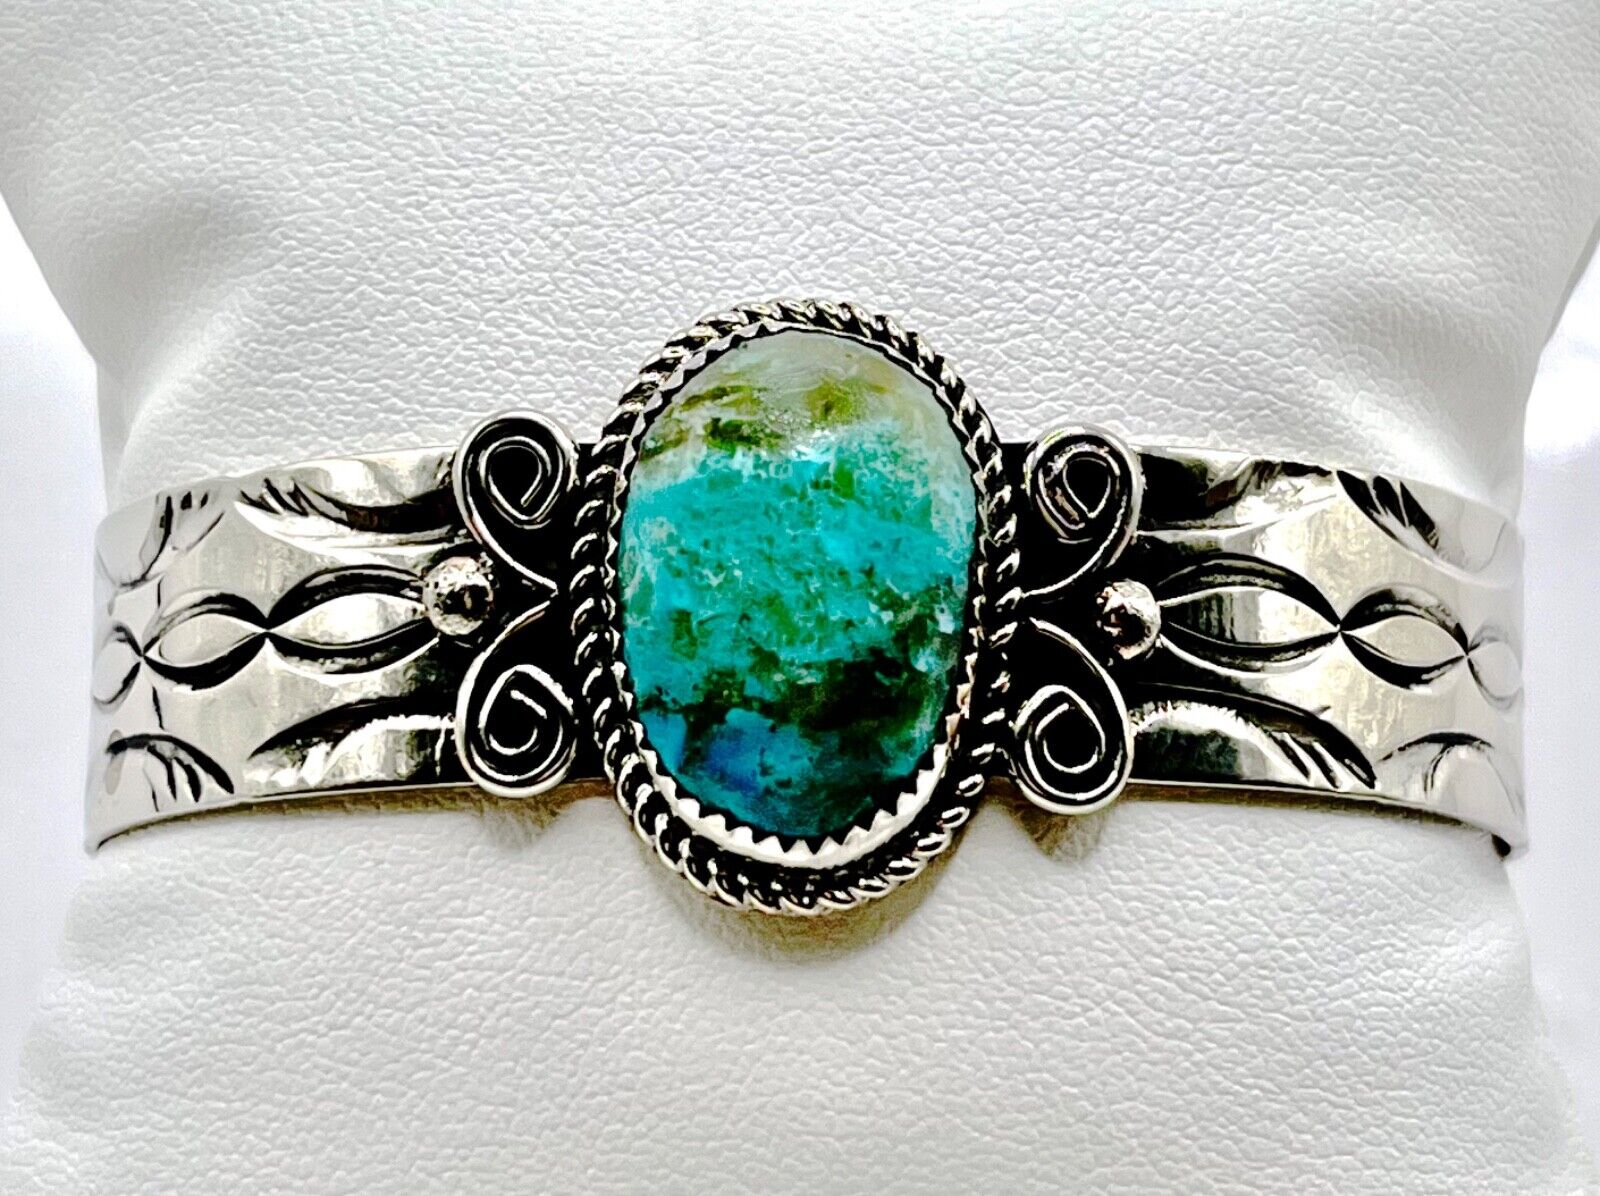 Signed Detailed Nickel Silver & Turquoise Cuff Bracelet by J. Cleveland